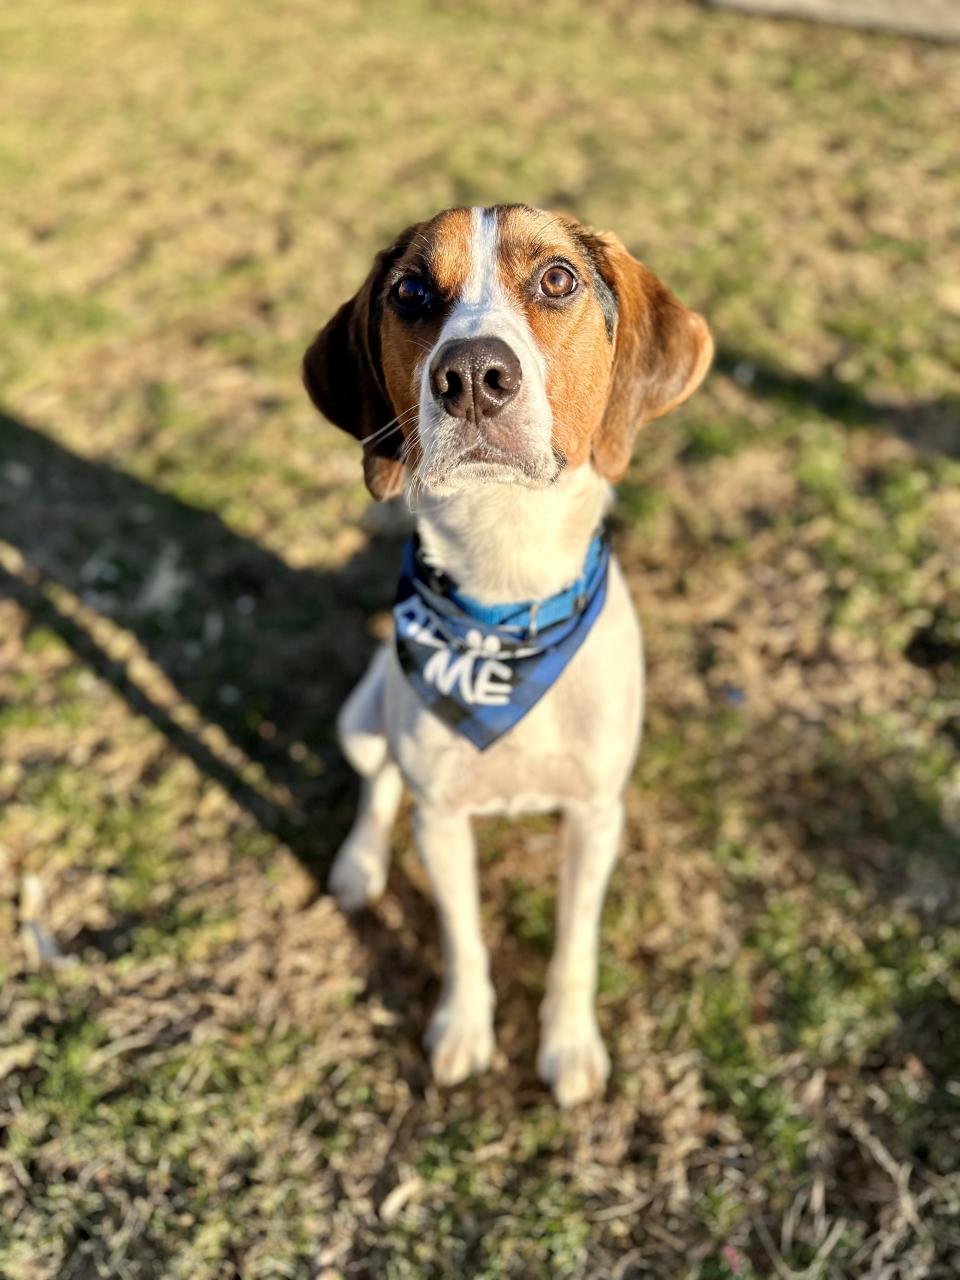 Dunkin is a 1-year-old beagle and hound mix. He is available for adoption through FOWA Rescue in Wayne.